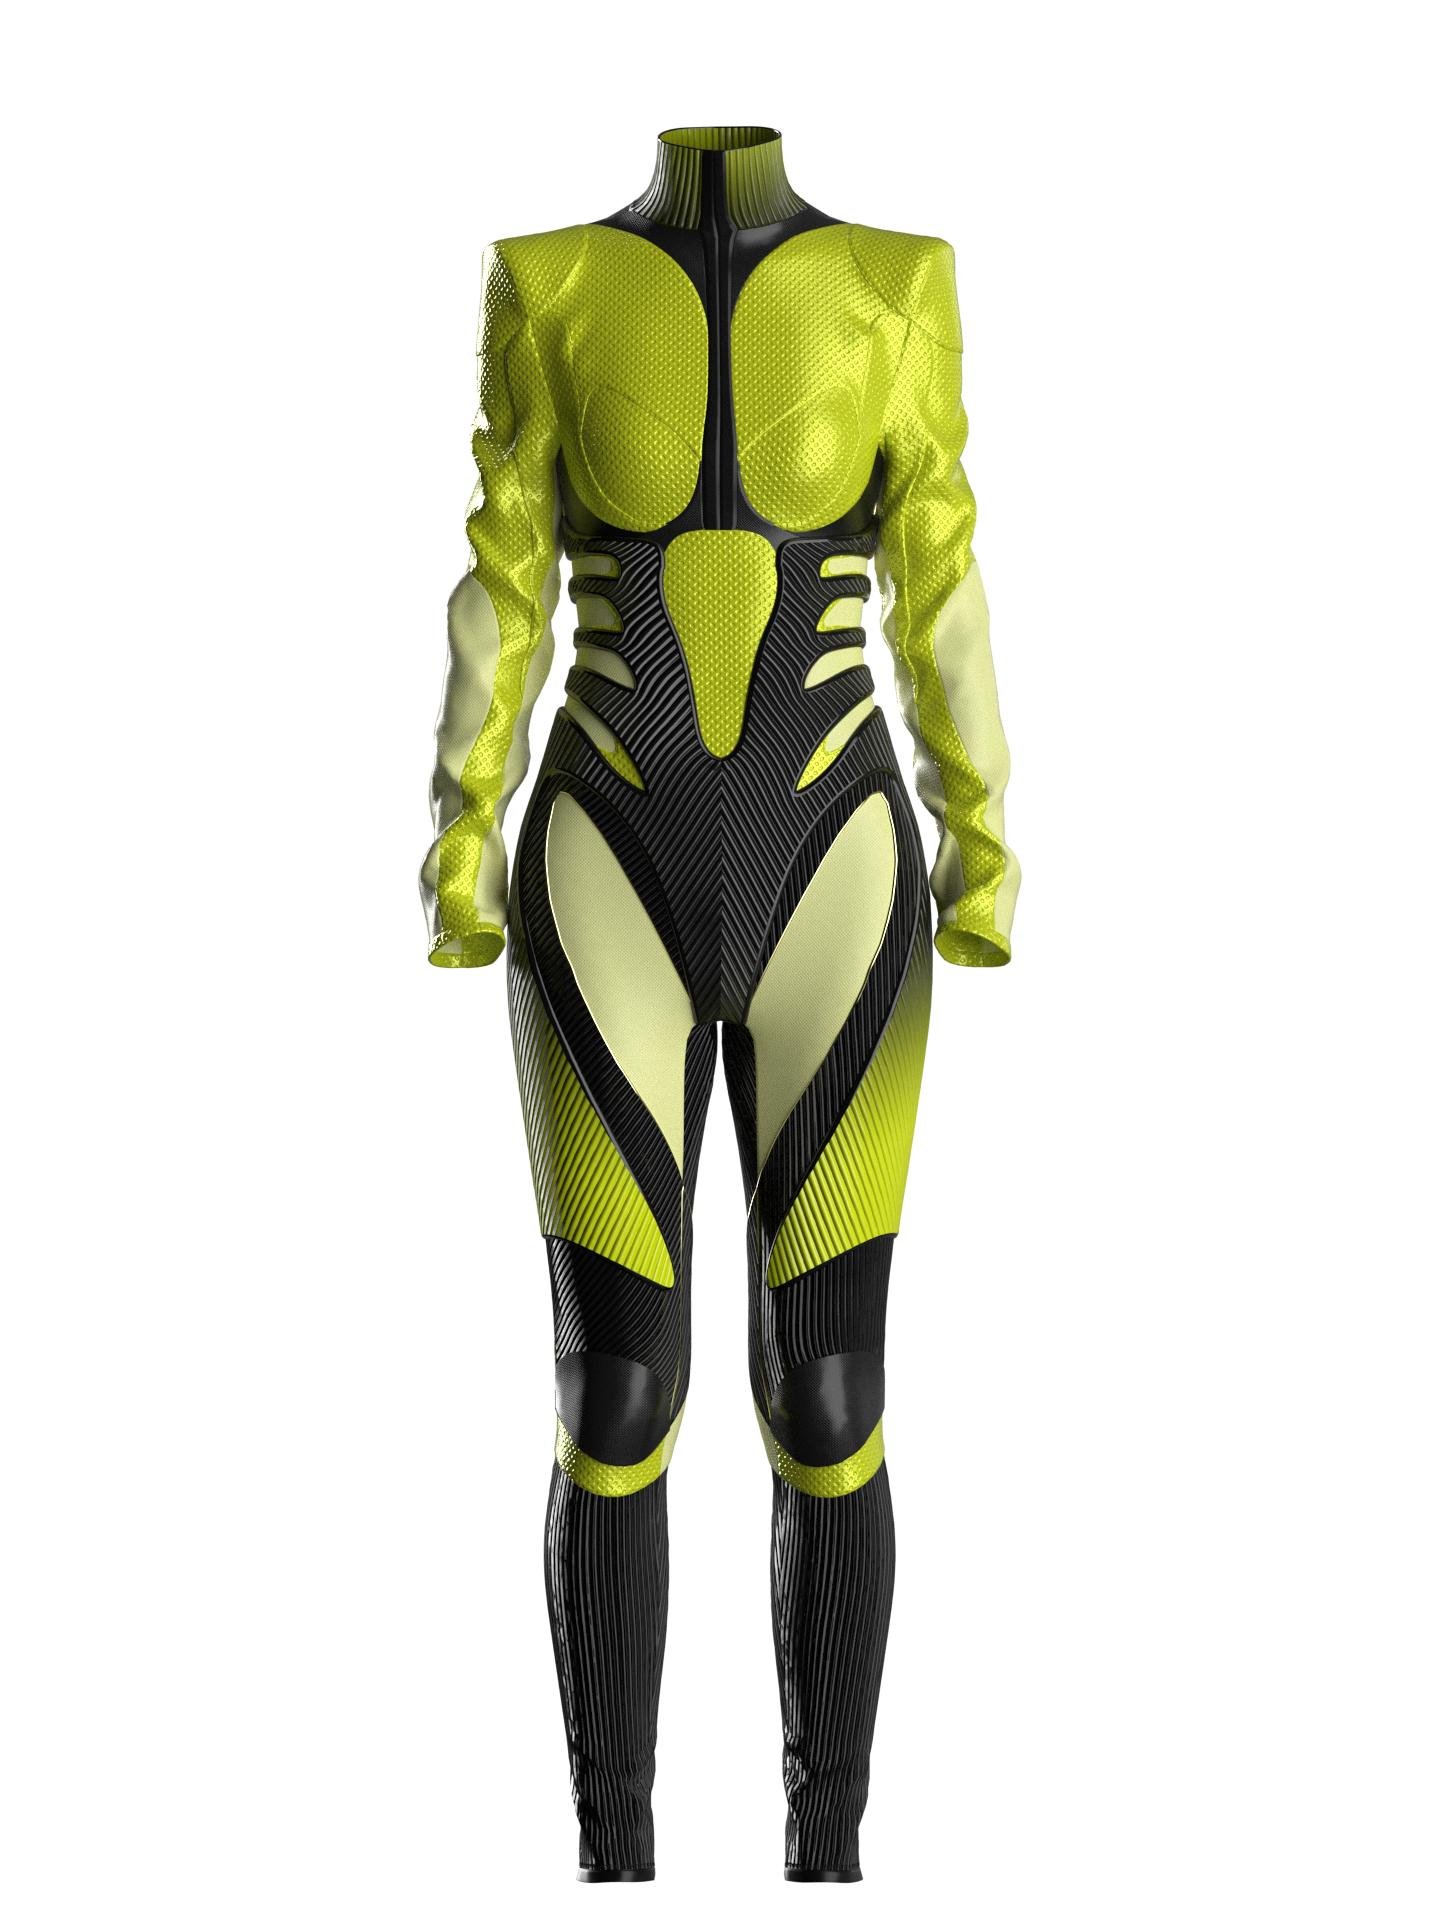 Race catsuit by COOLTREDE